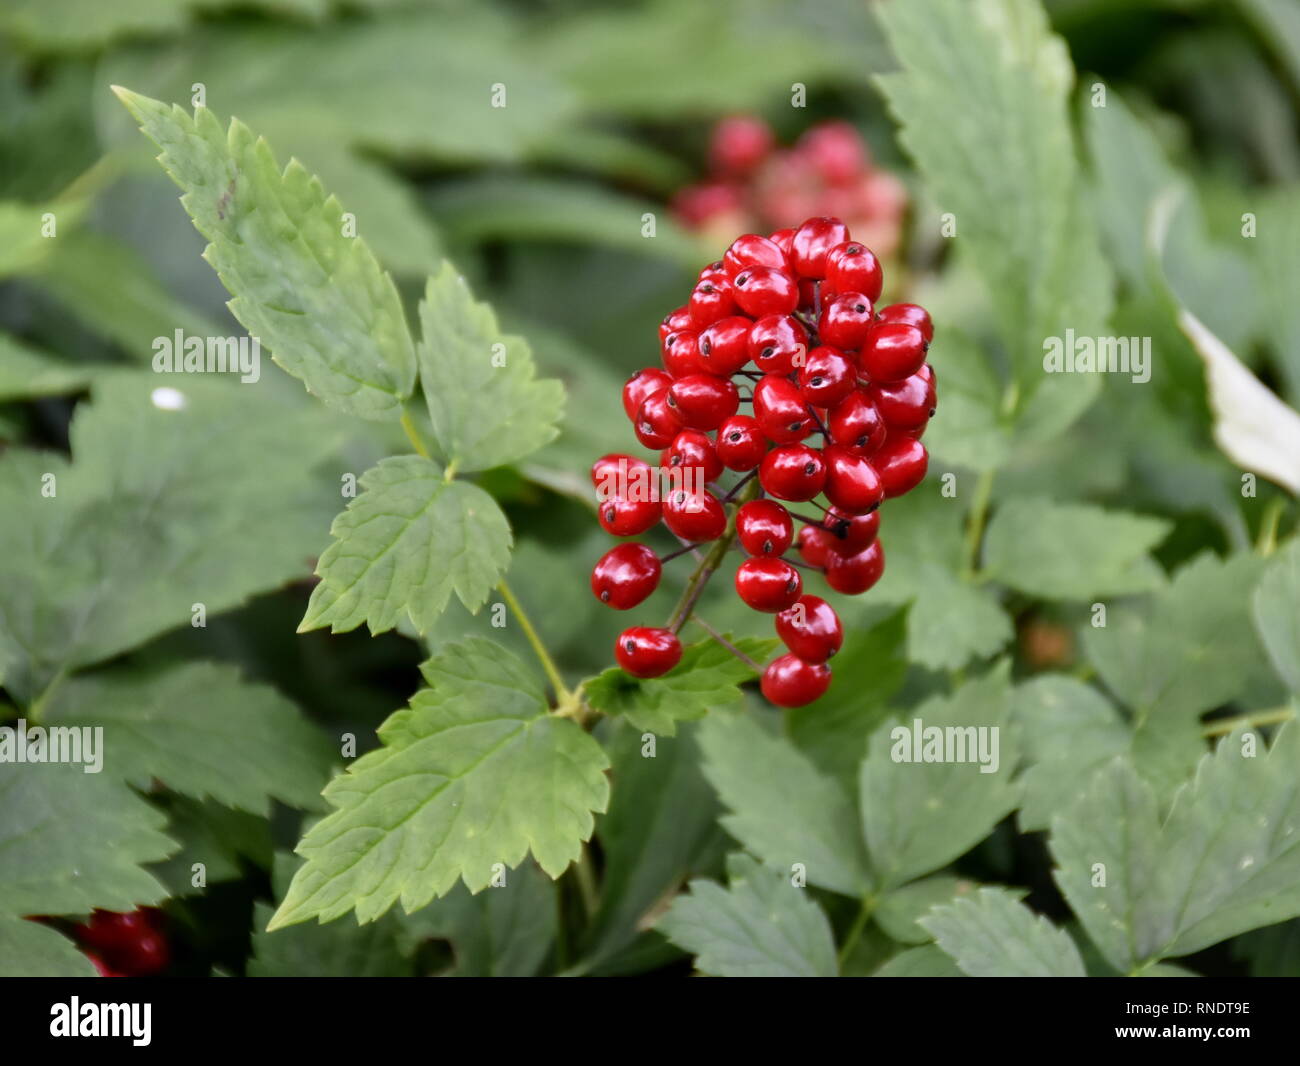 The poisonous red berry from baneberry plant Actaea rubra in a forest Stock Photo